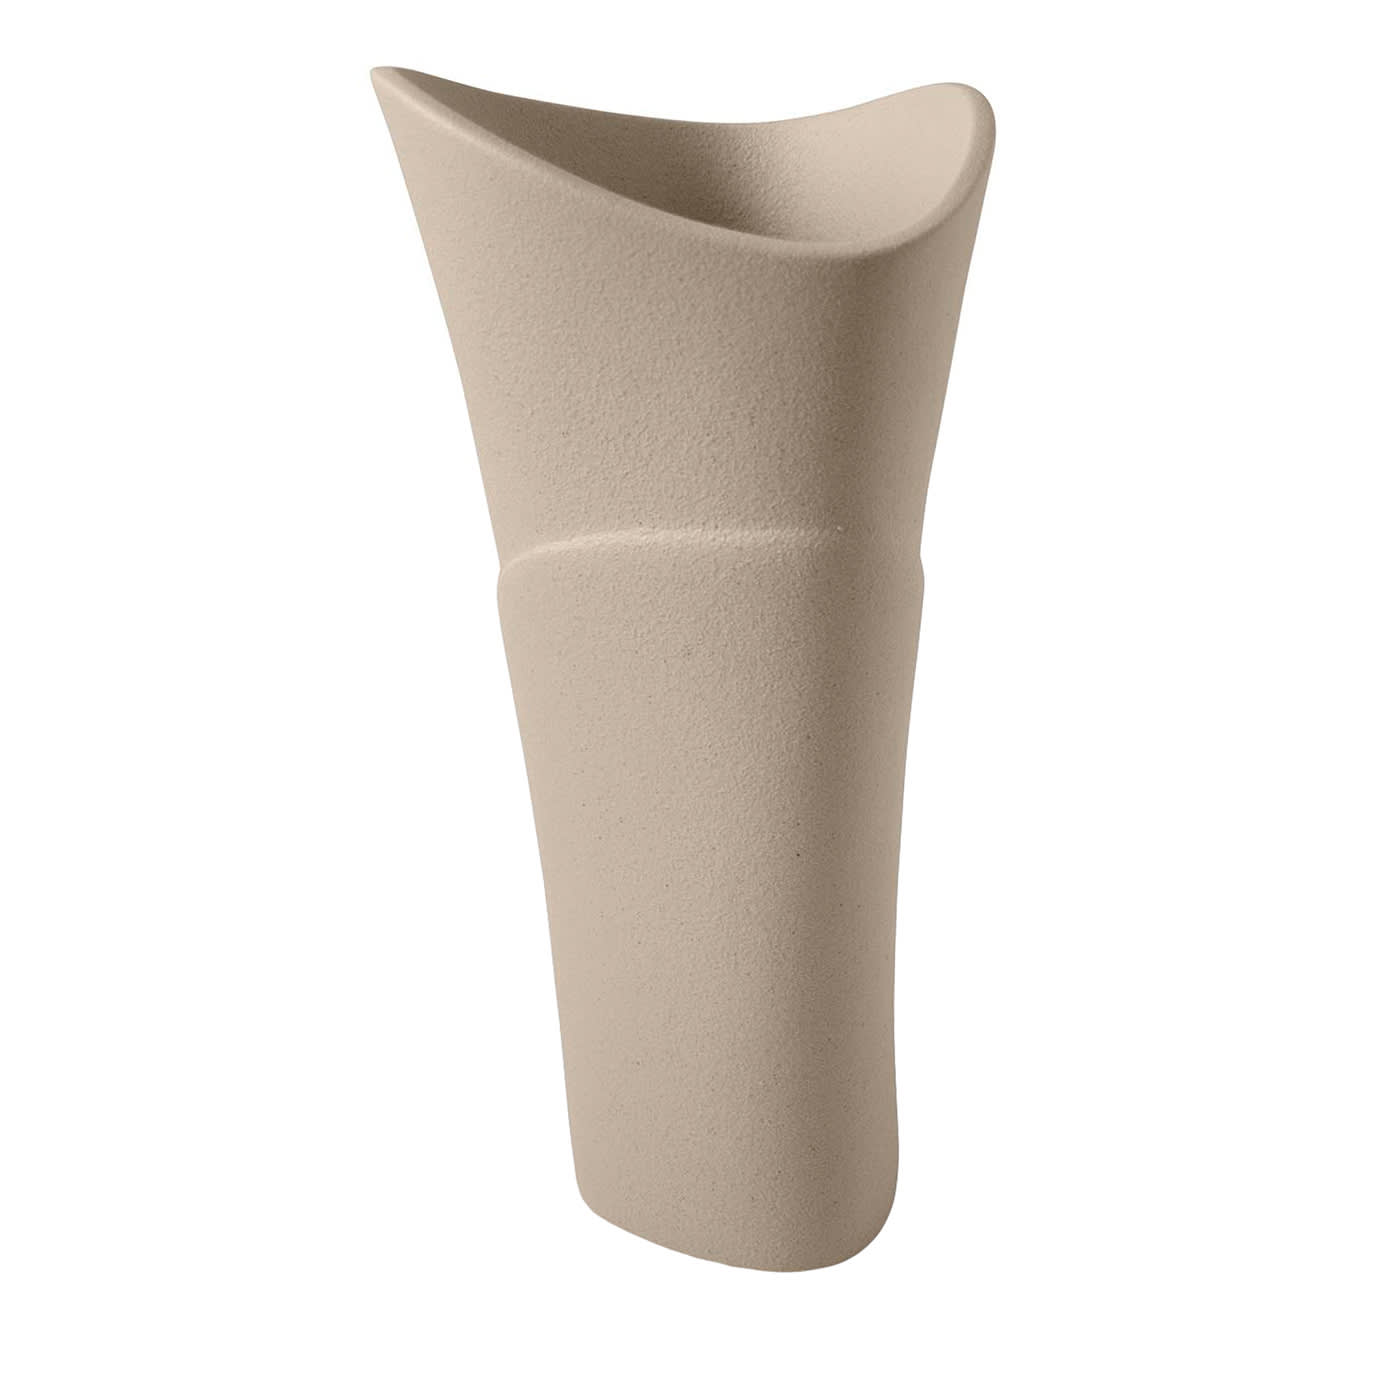 Beige Vase by Tiziano Panigas - Lineasette